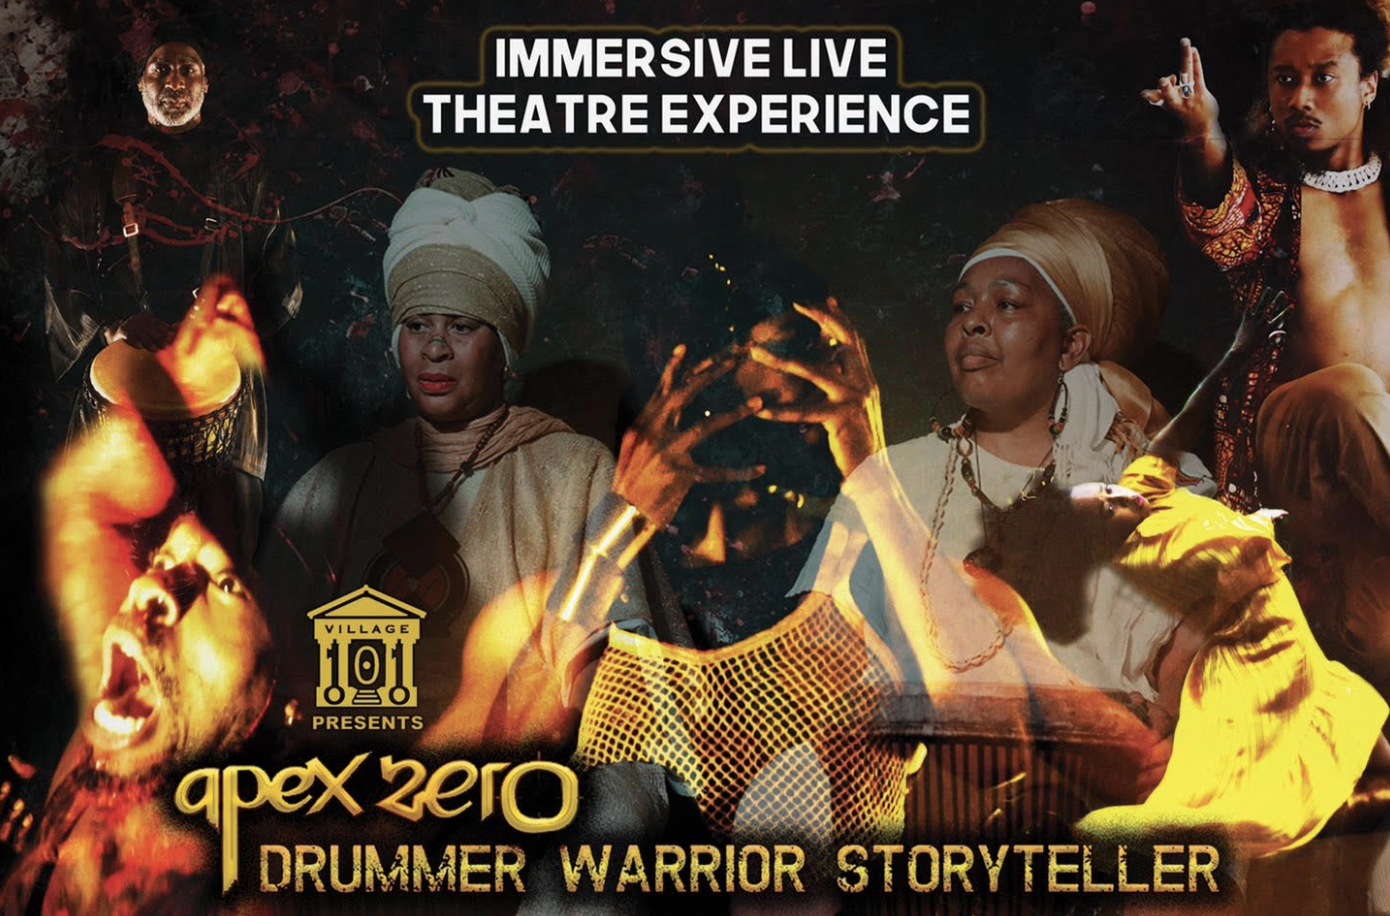 Drummer, Warrior Storyteller – an enriching live experience that inspired and provoked change